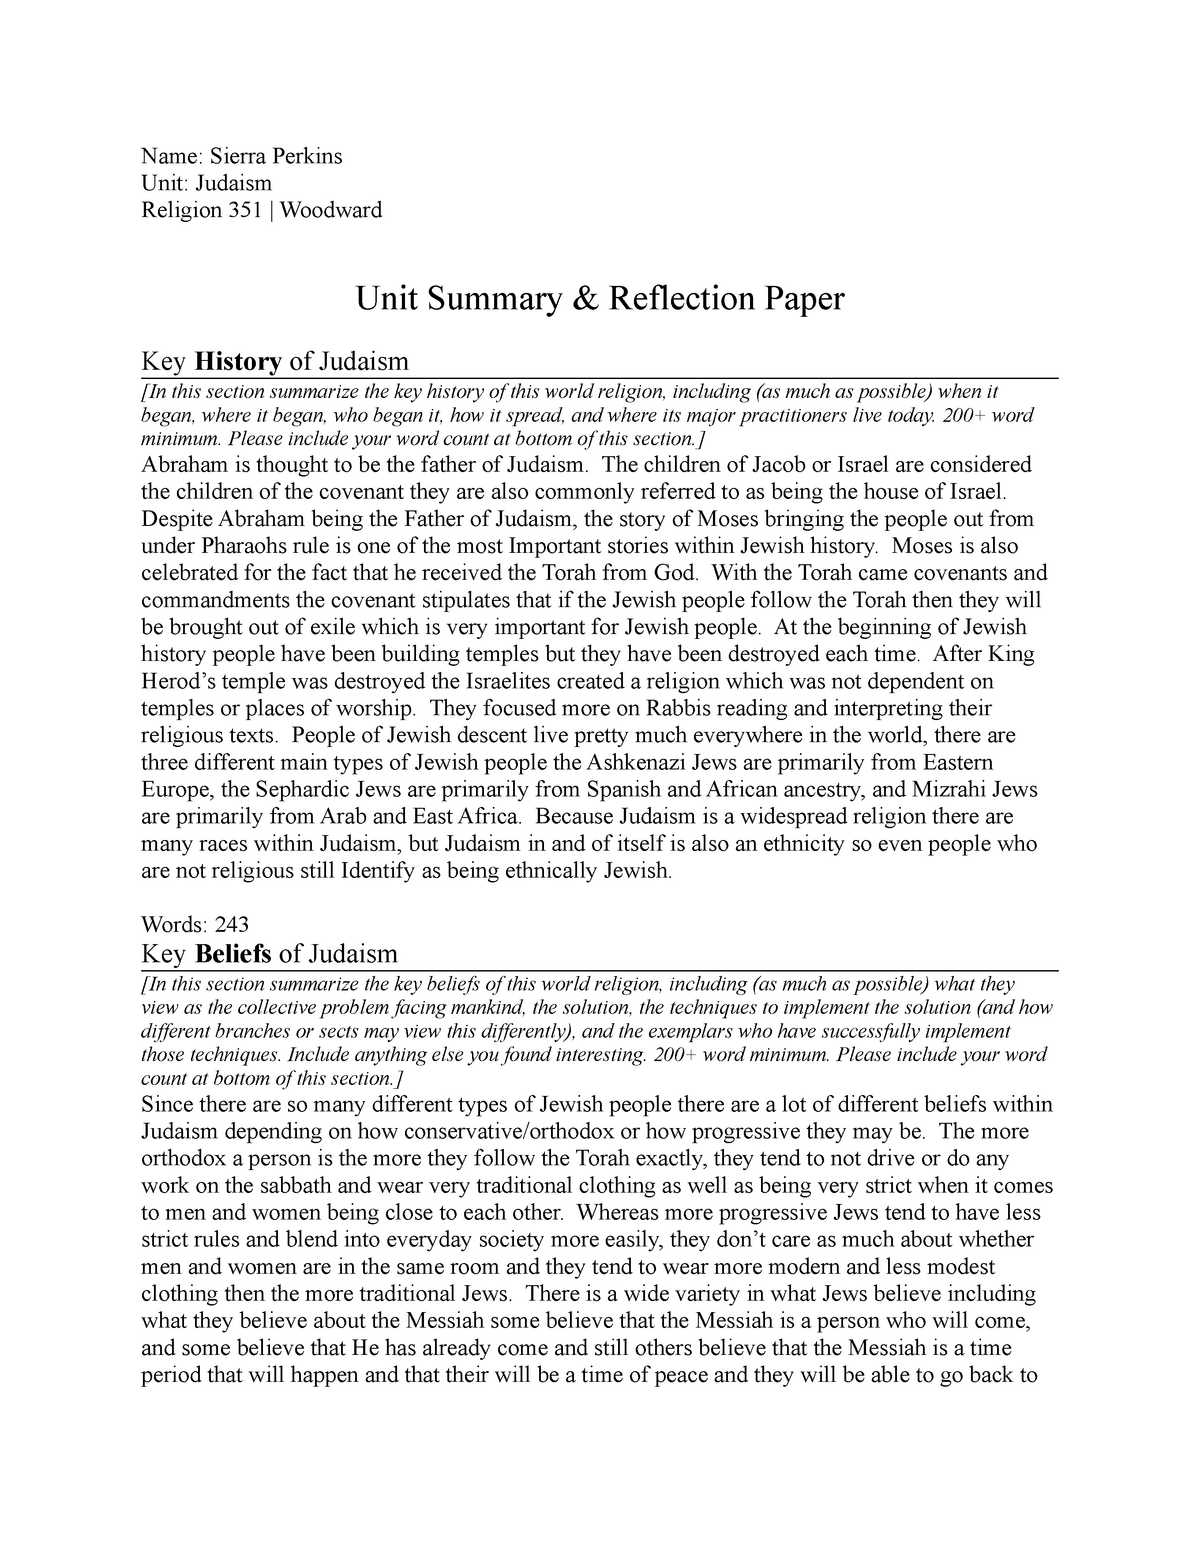 judaism research paper